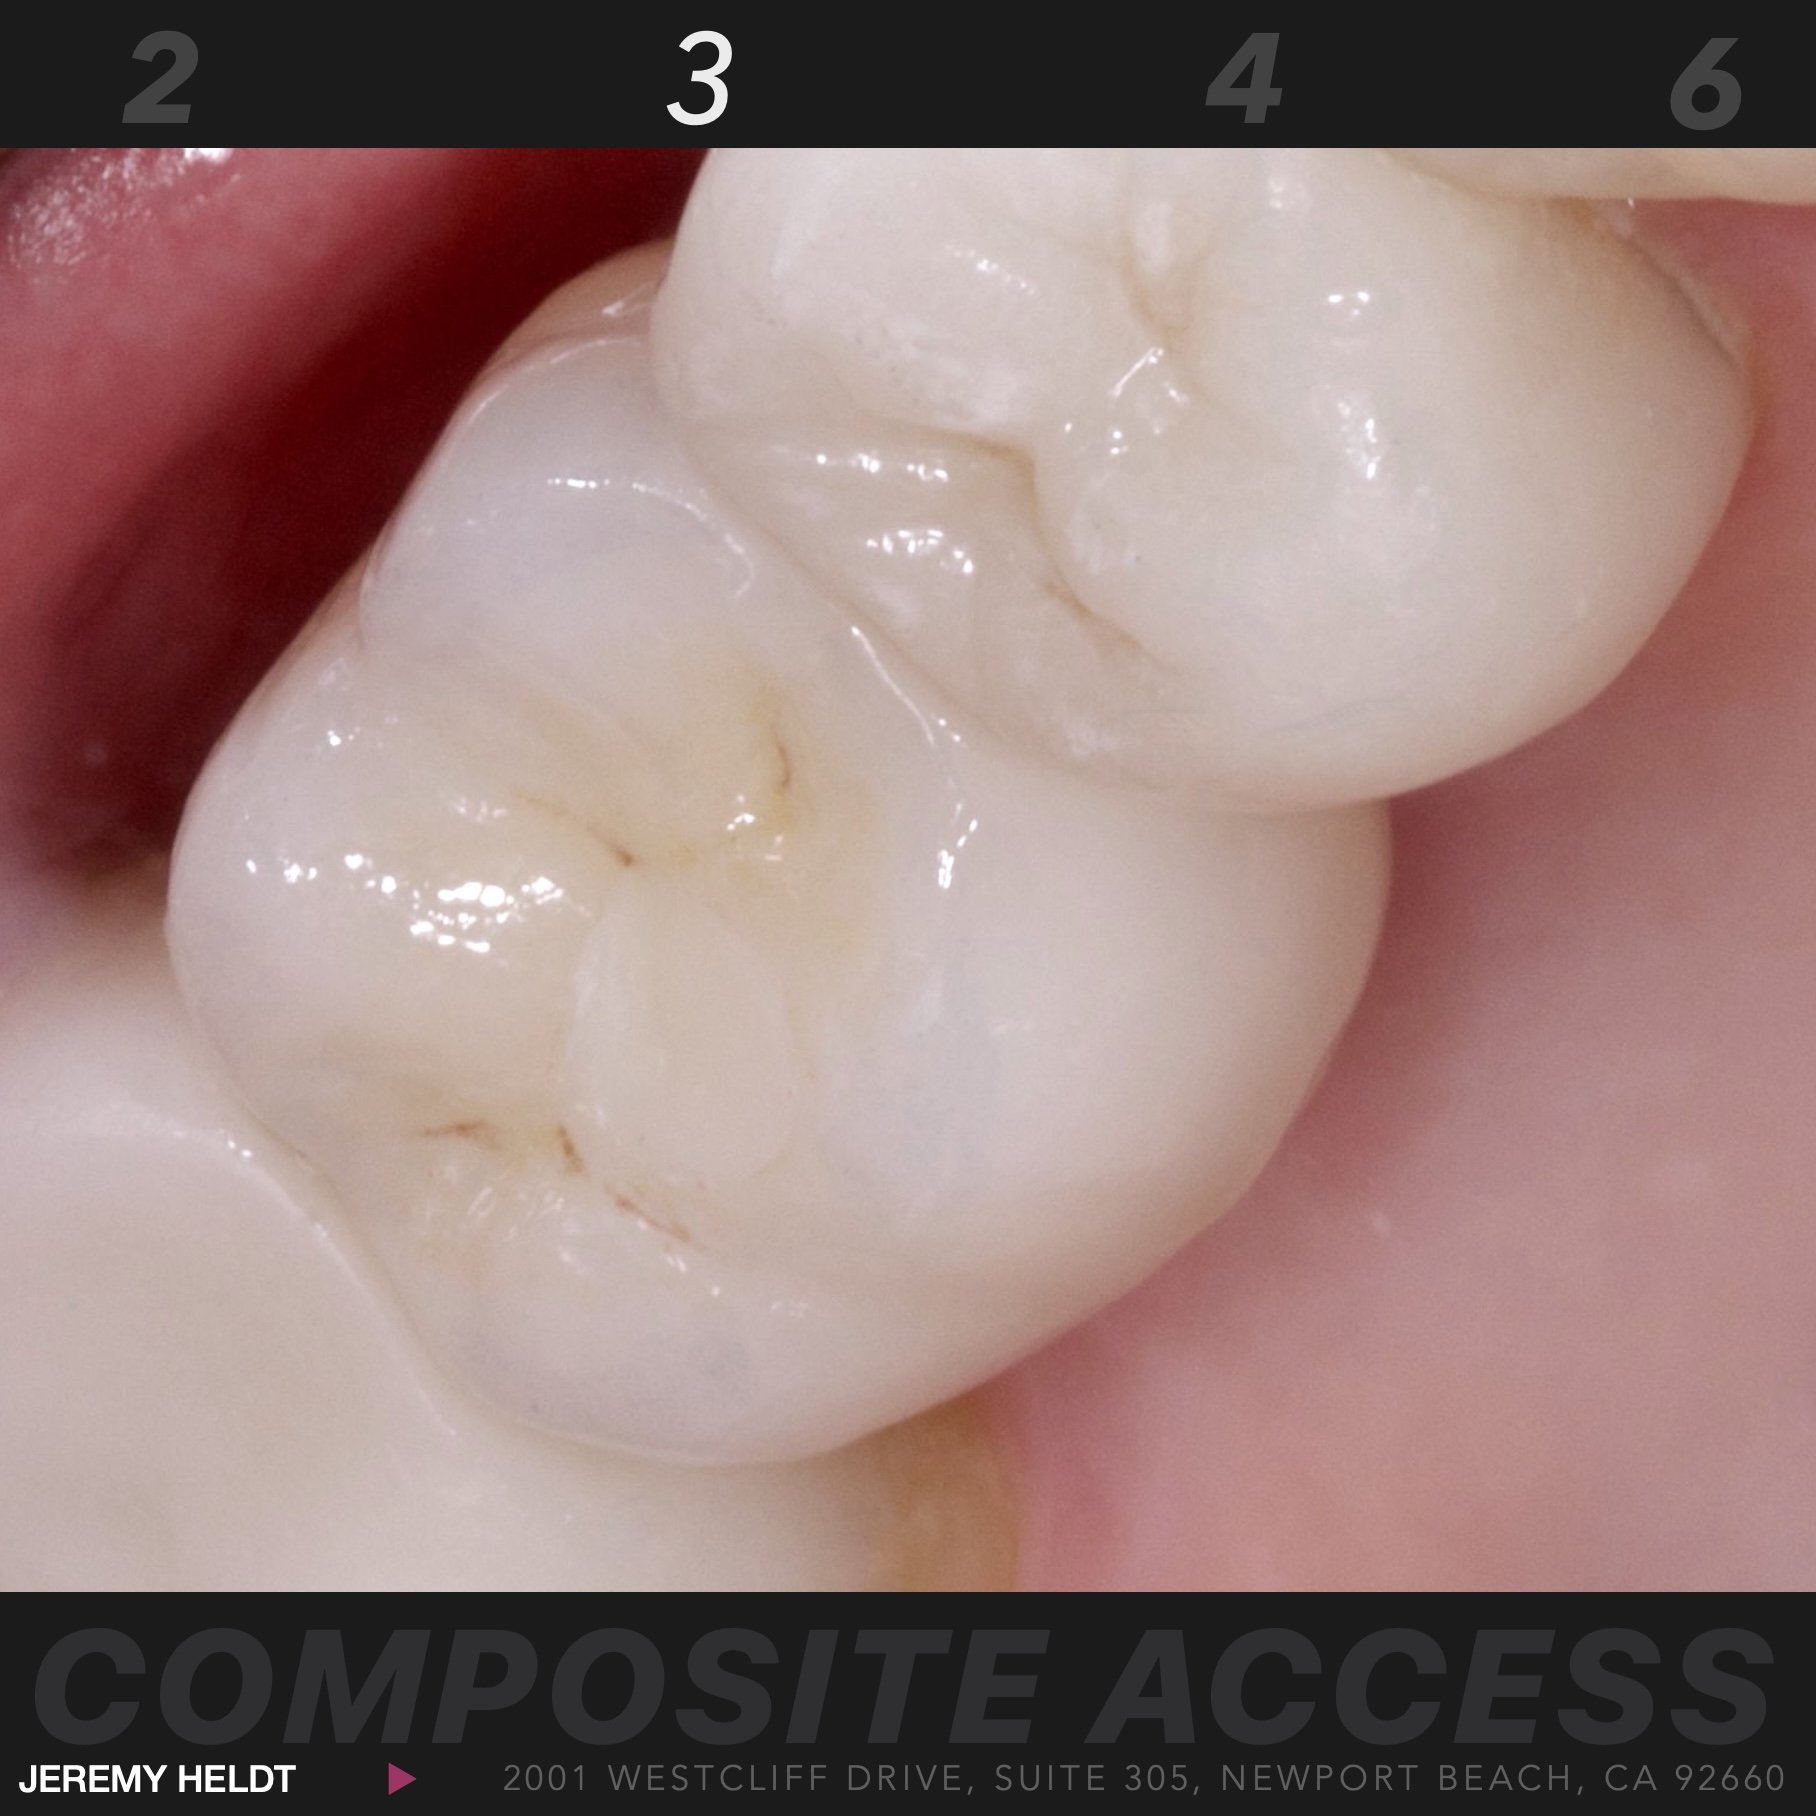 Dental Implant Abutment and Crown Newport Beach